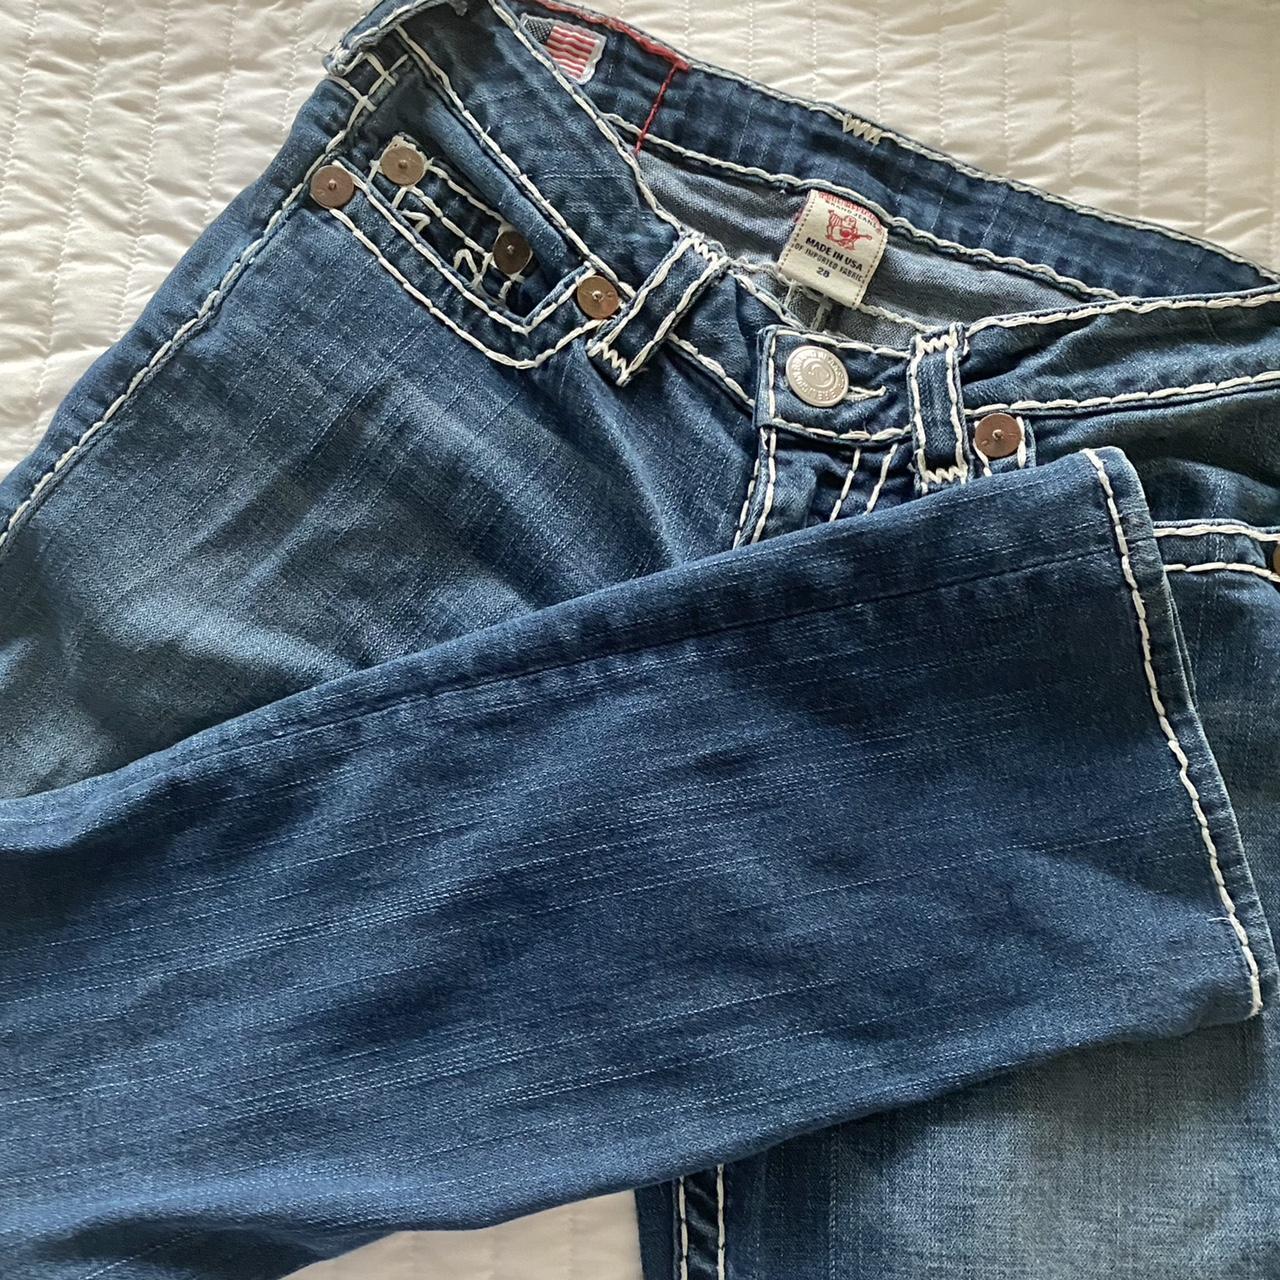 Gently used jeans price negotiable also vintage - Depop